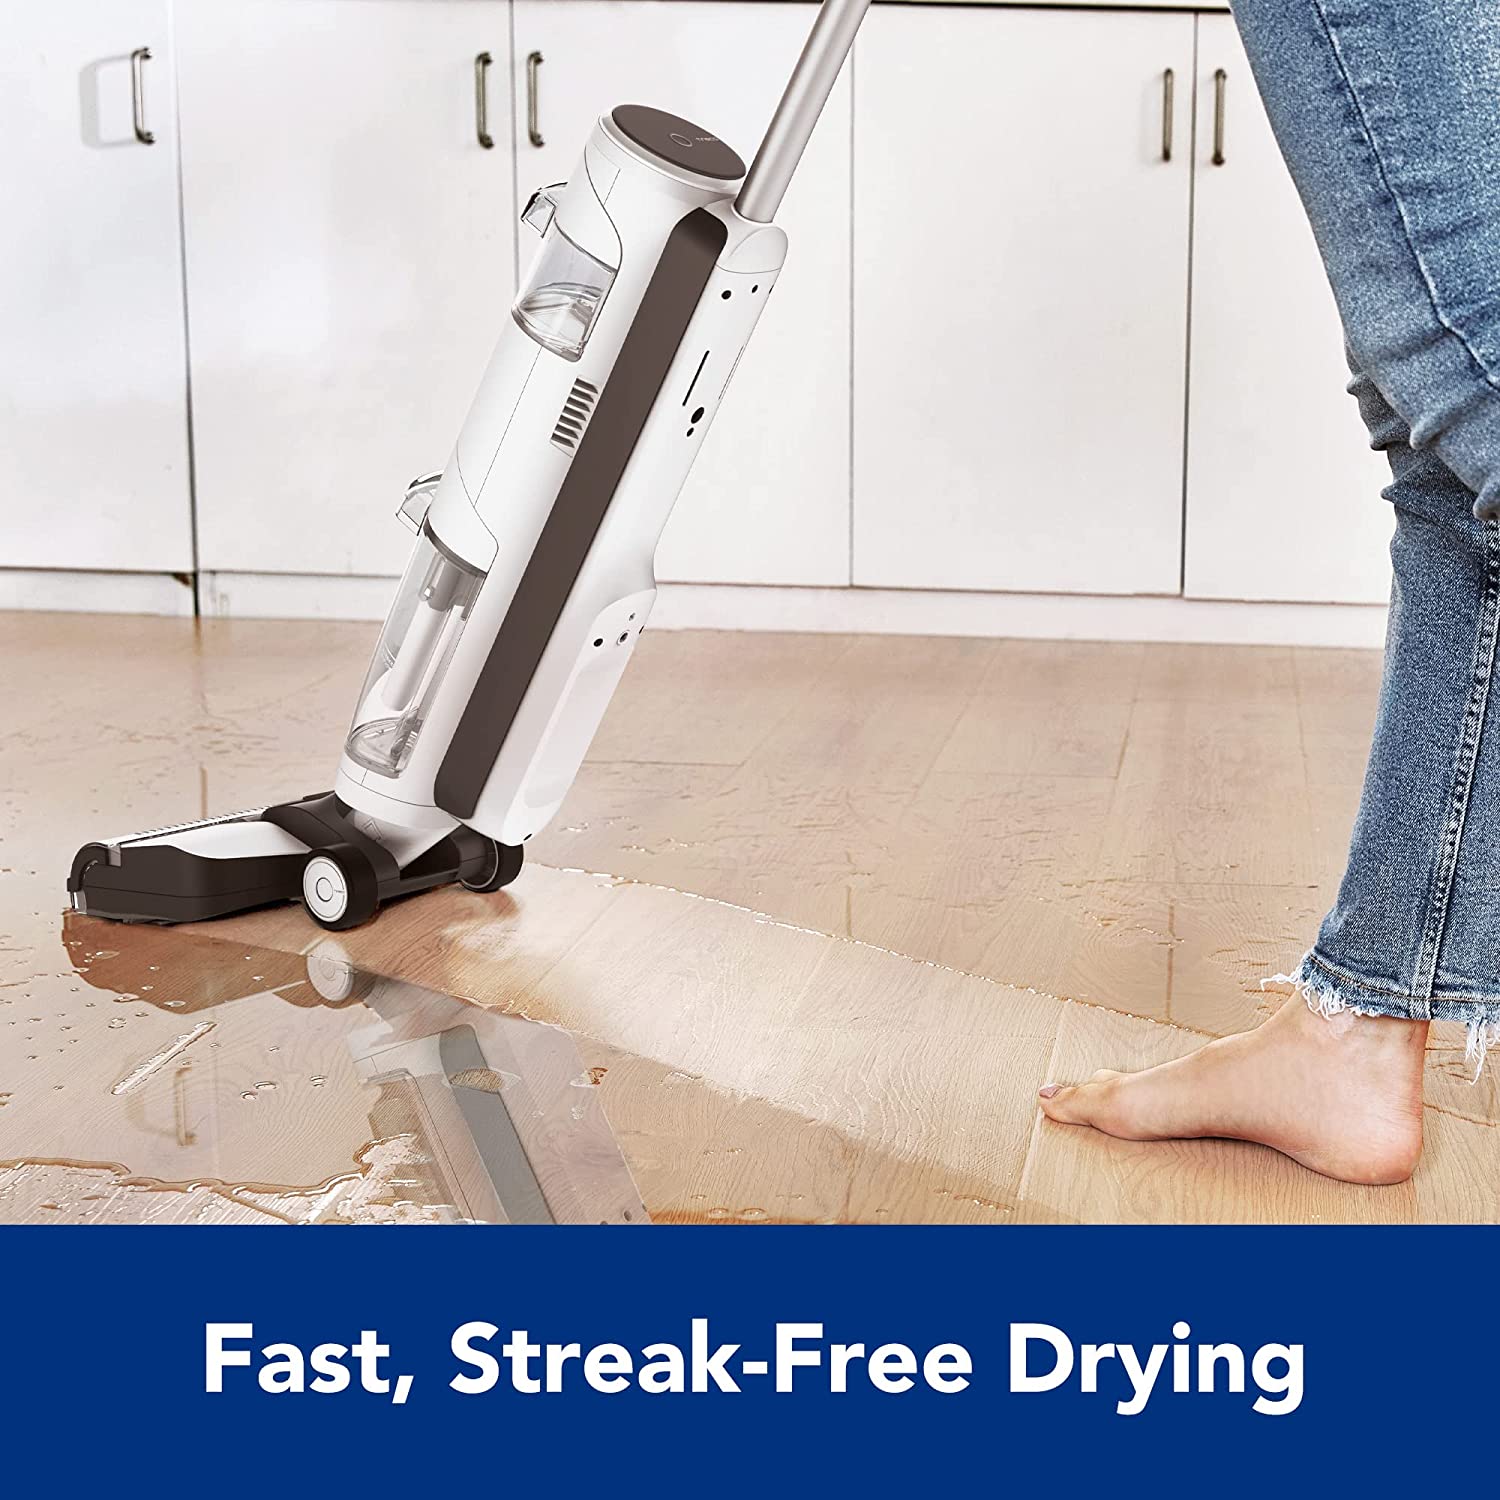  Tineco FLOOR ONE S5 Steam Cleaner Wet Dry Vacuum All-in-one,  Hardwood Floor Cleaner Great for Sticky Messes, Smart Steam Mop for Hard  Floors with Digital Display and Long Run Time